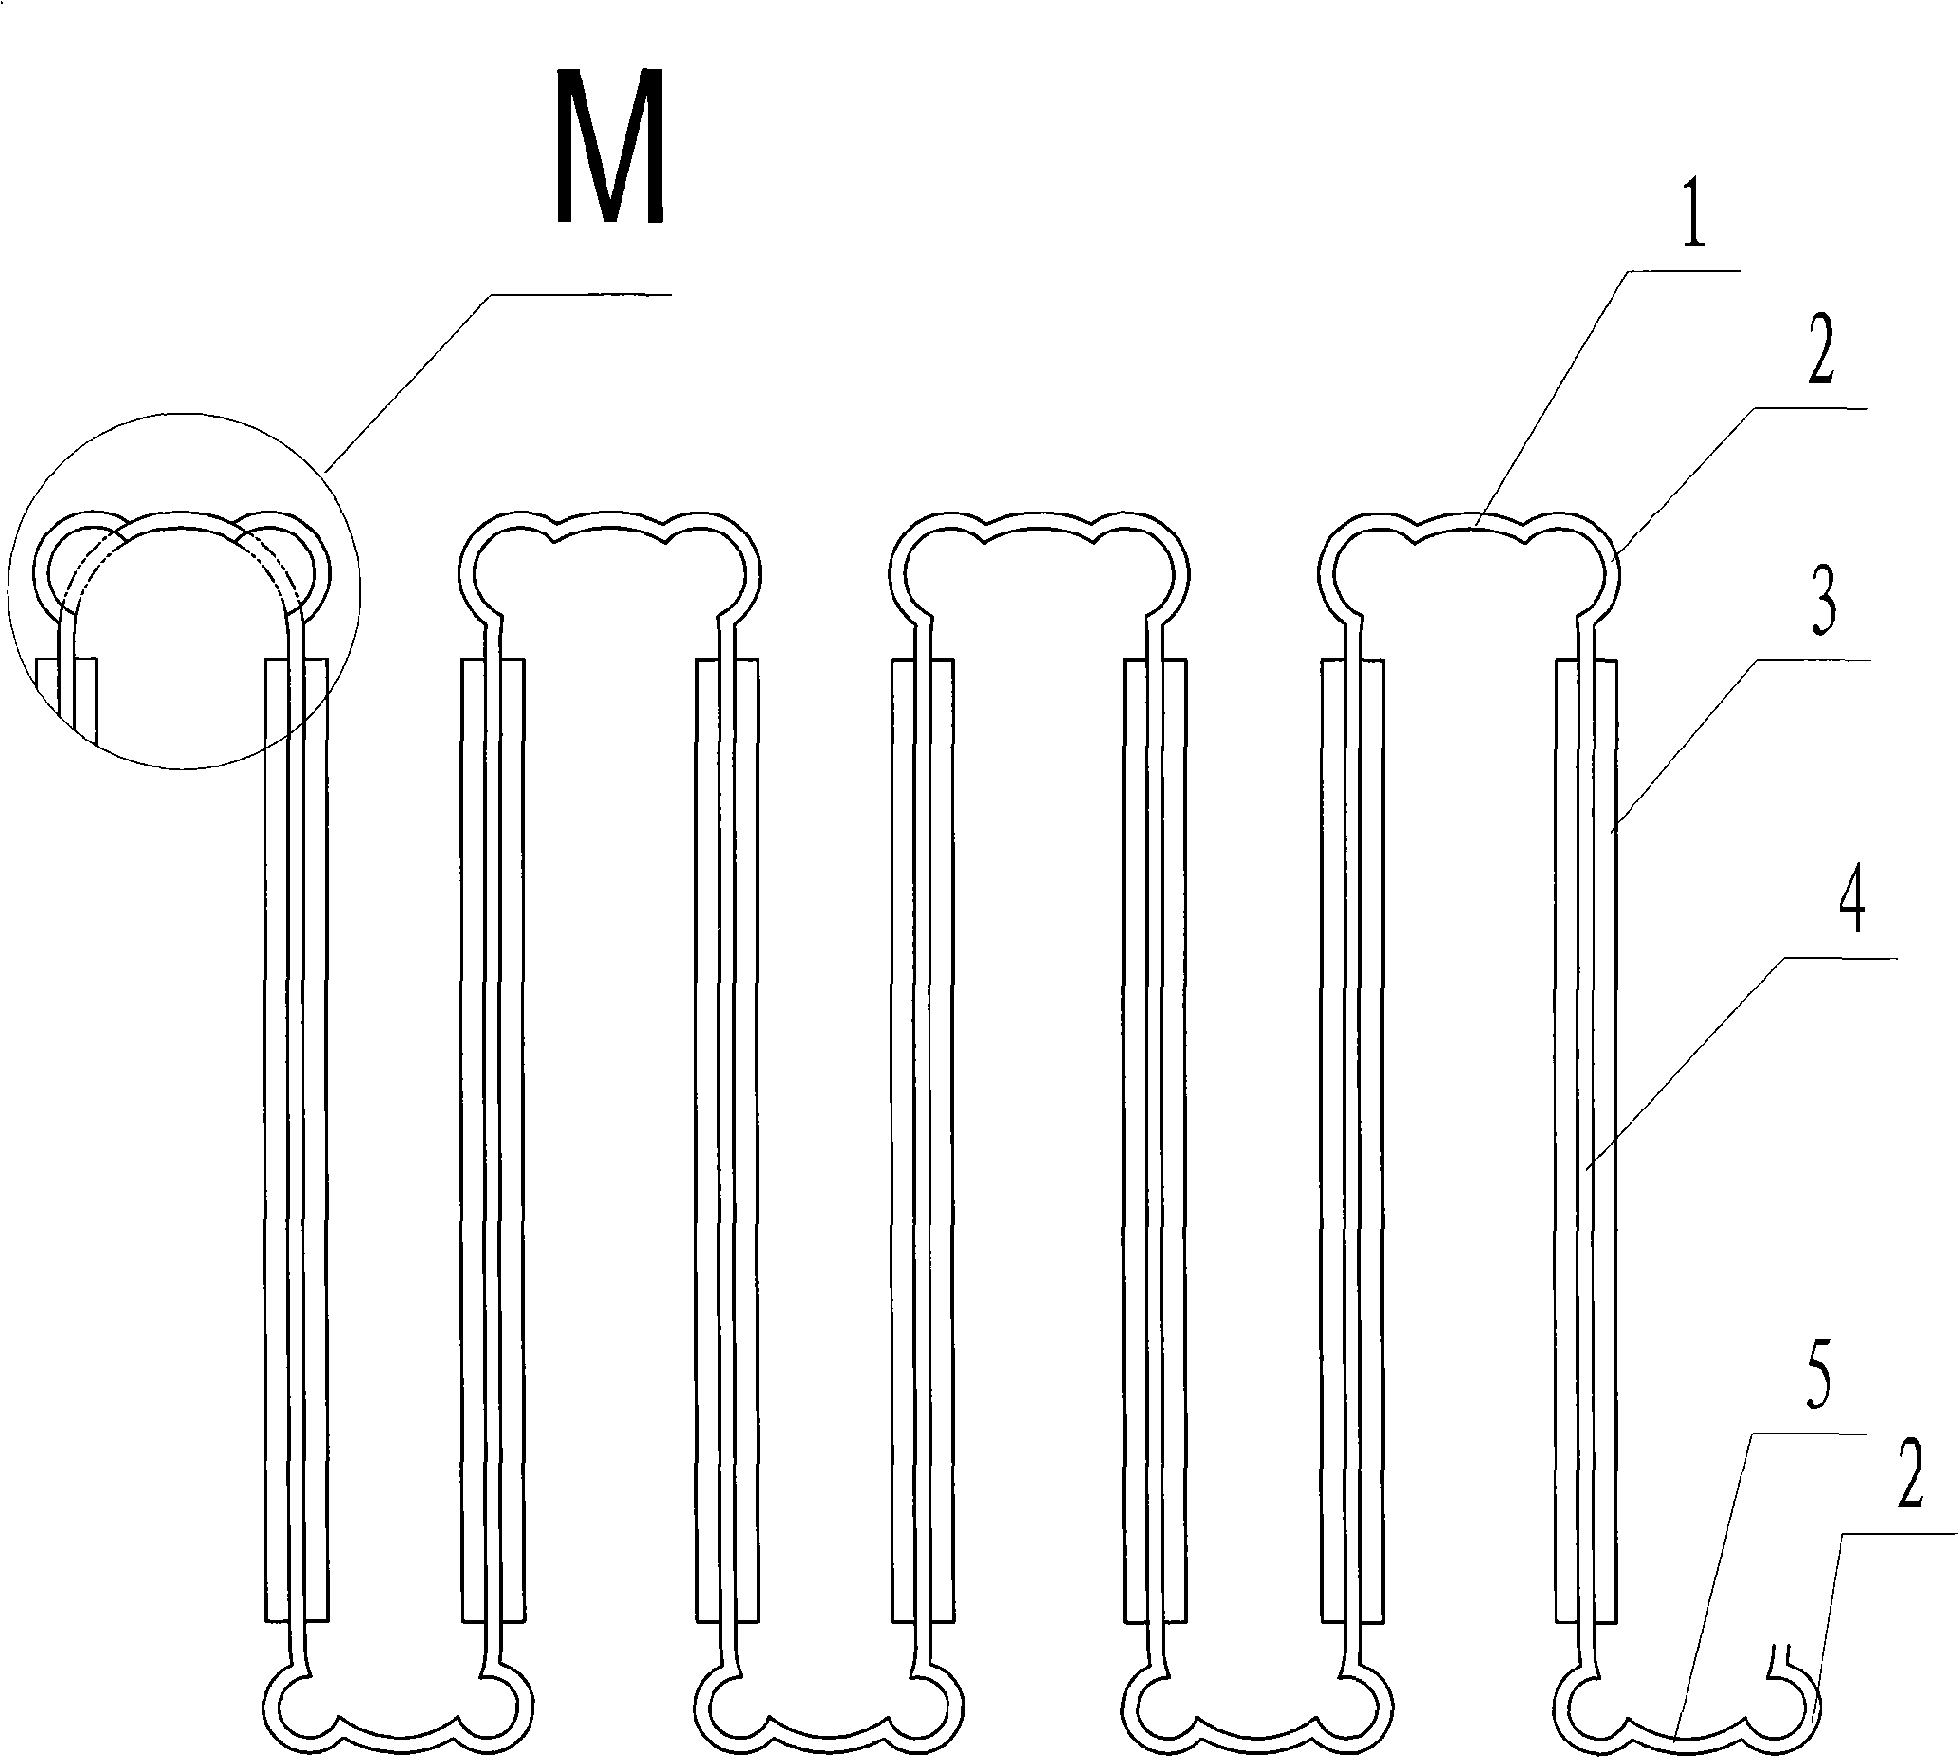 Fin structure for air-conditioning evaporators